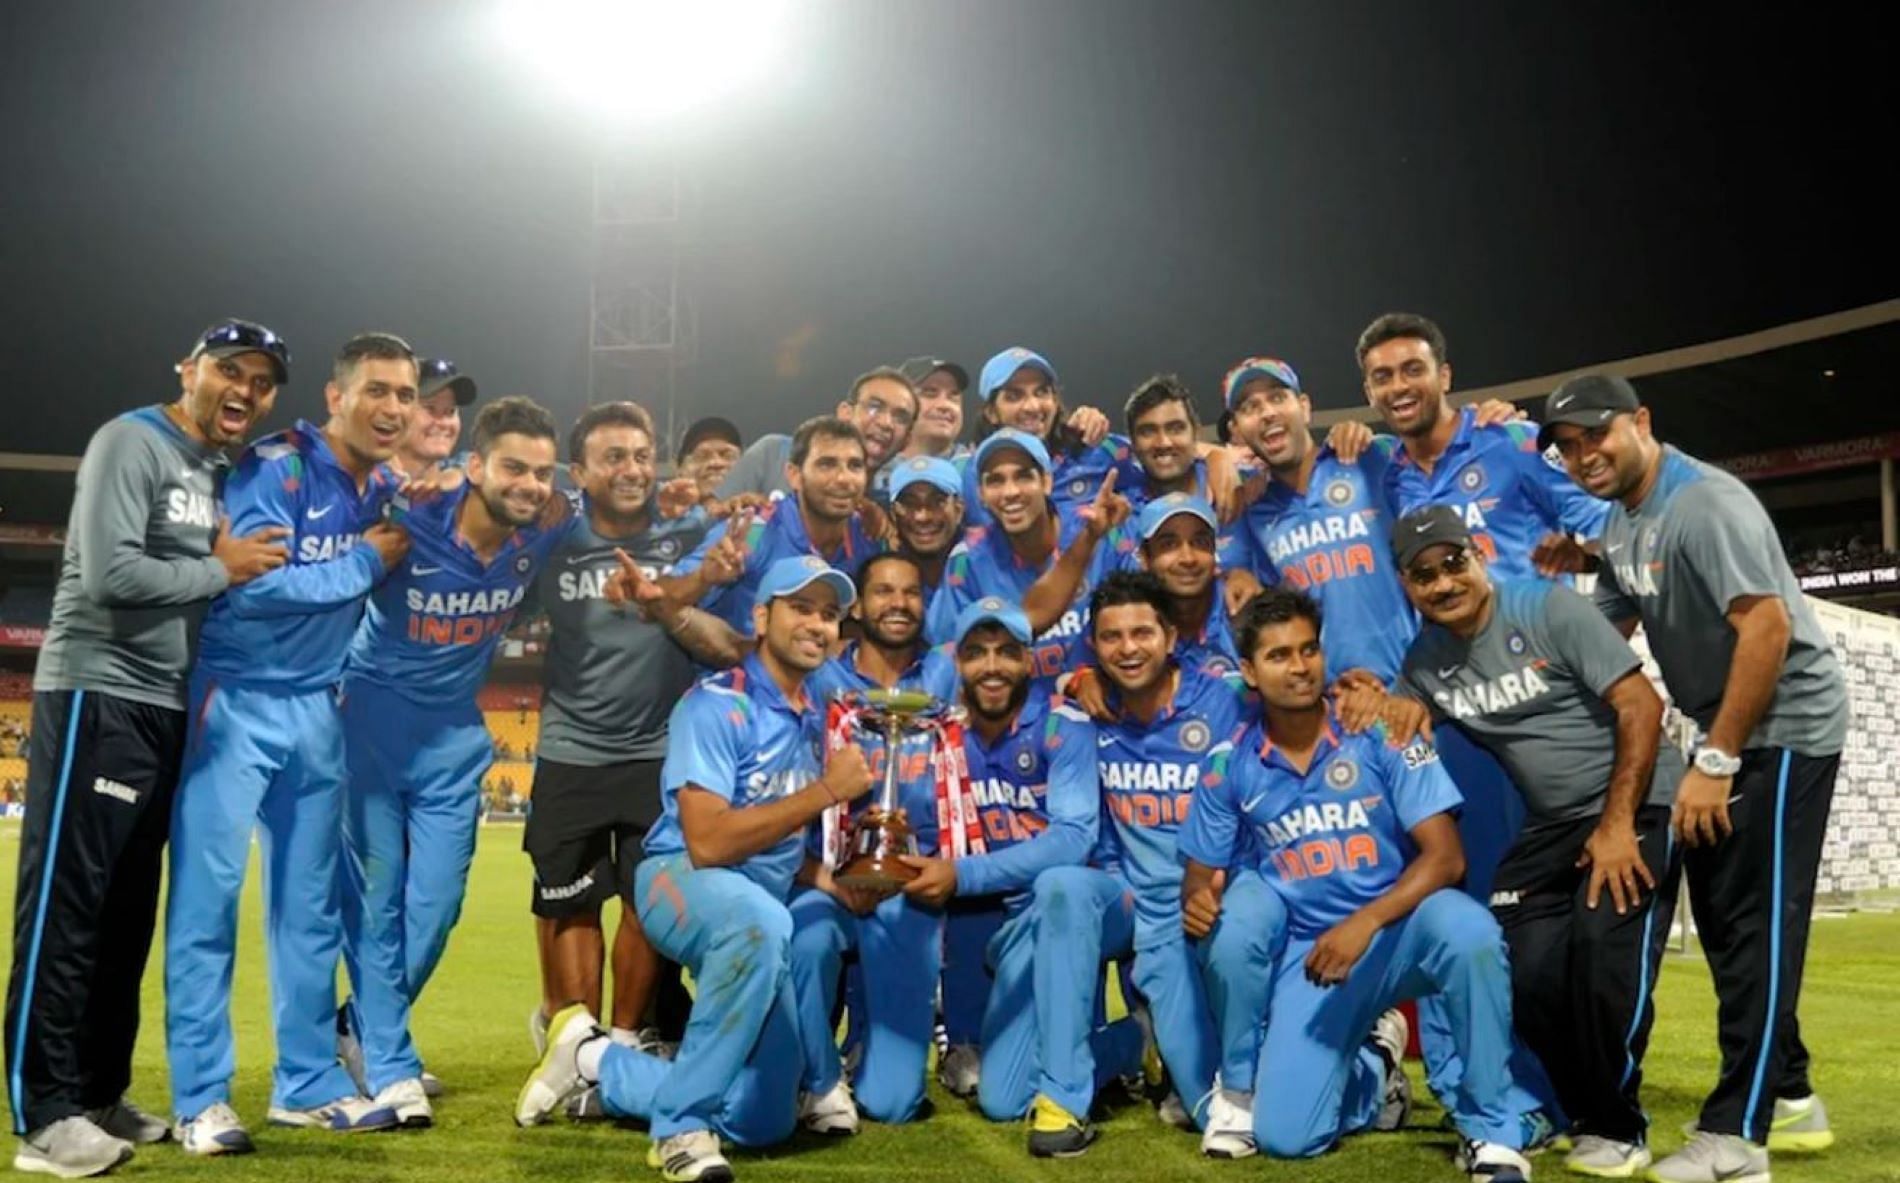 India came back from 1-2 down to win the series.